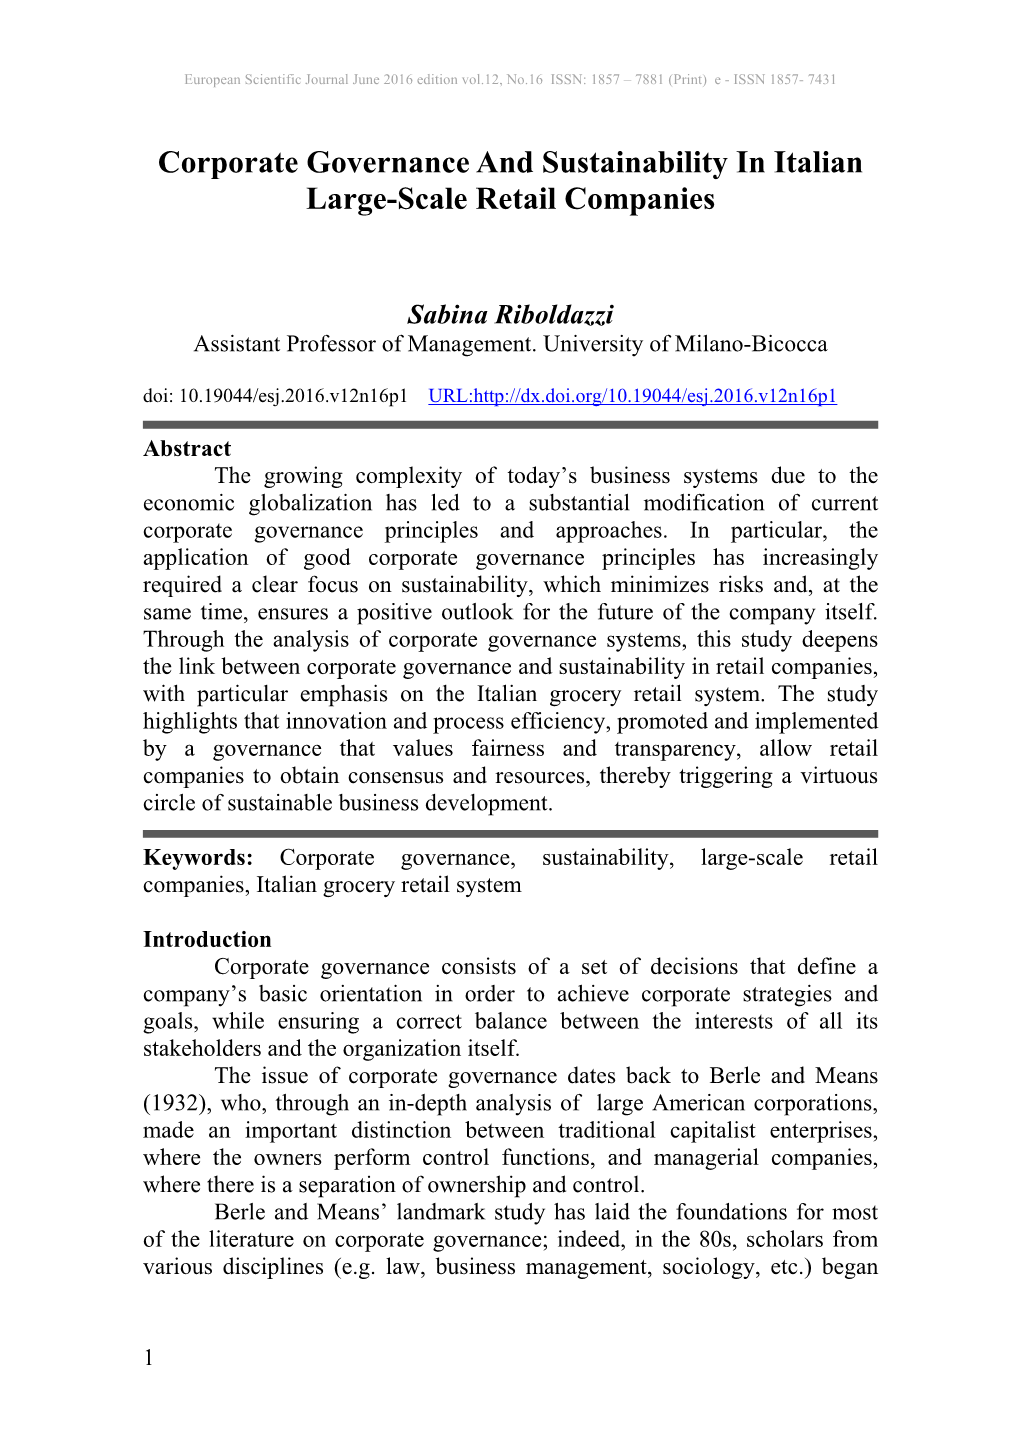 Corporate Governance and Sustainability in Italian Large-Scale Retail Companies